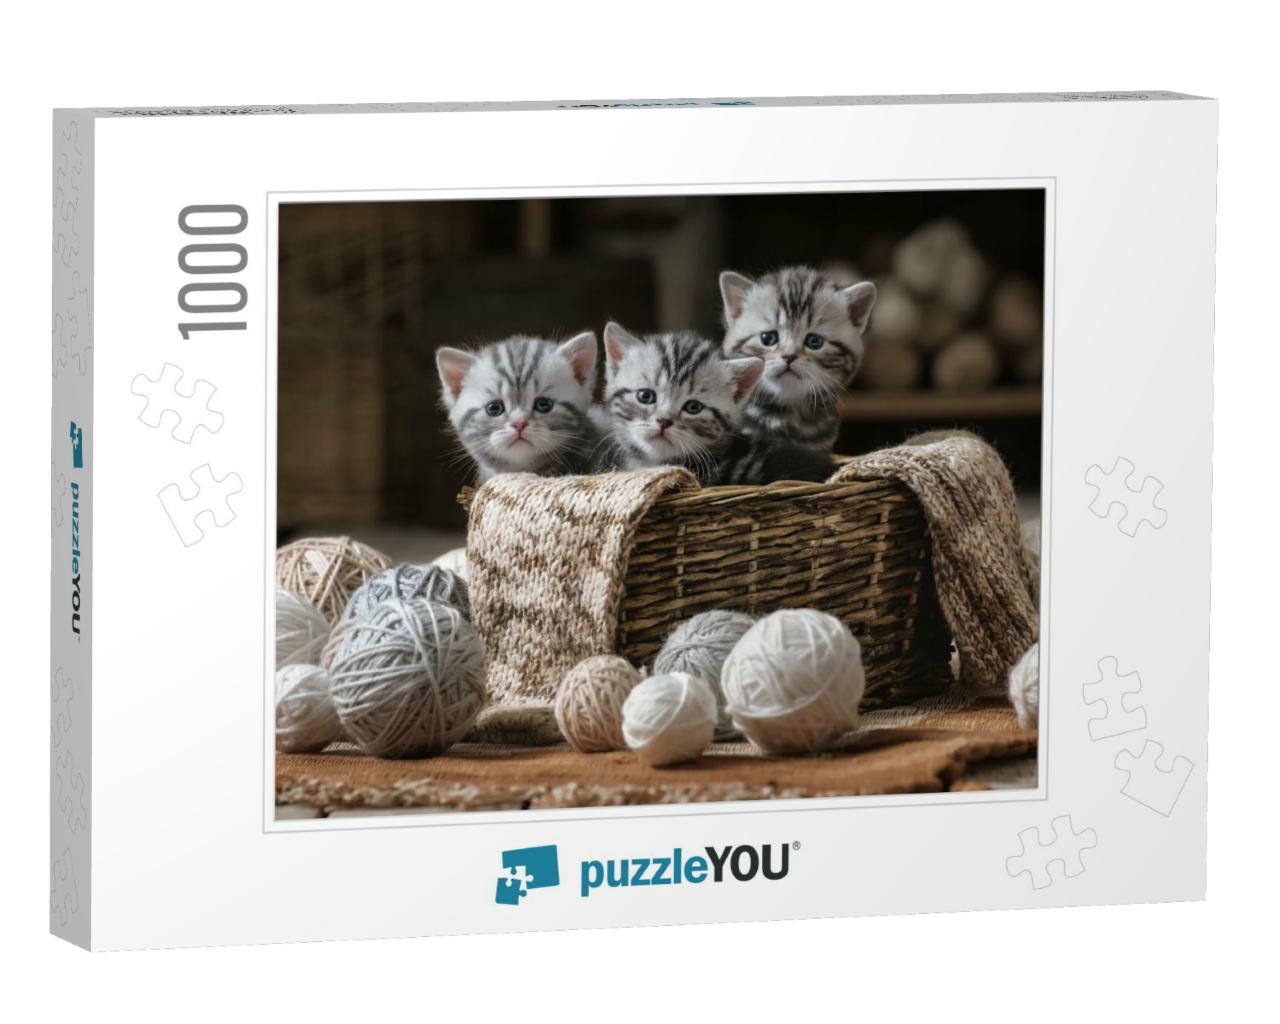 Group of Small Striped Kittens in an Old Basket with Ball... Jigsaw Puzzle with 1000 pieces